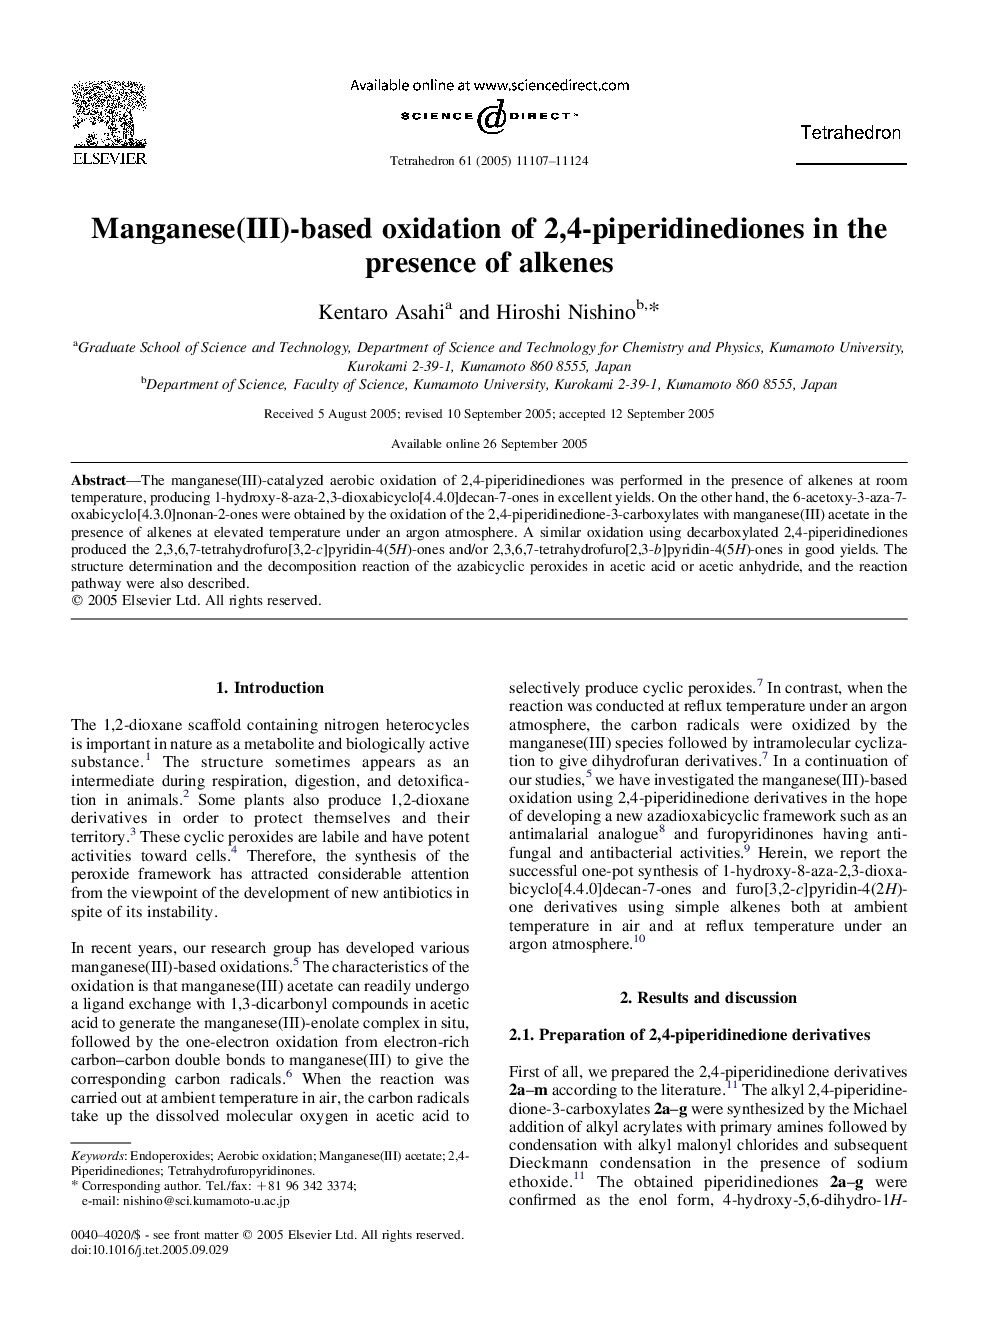 Manganese(III)-based oxidation of 2,4-piperidinediones in the presence of alkenes